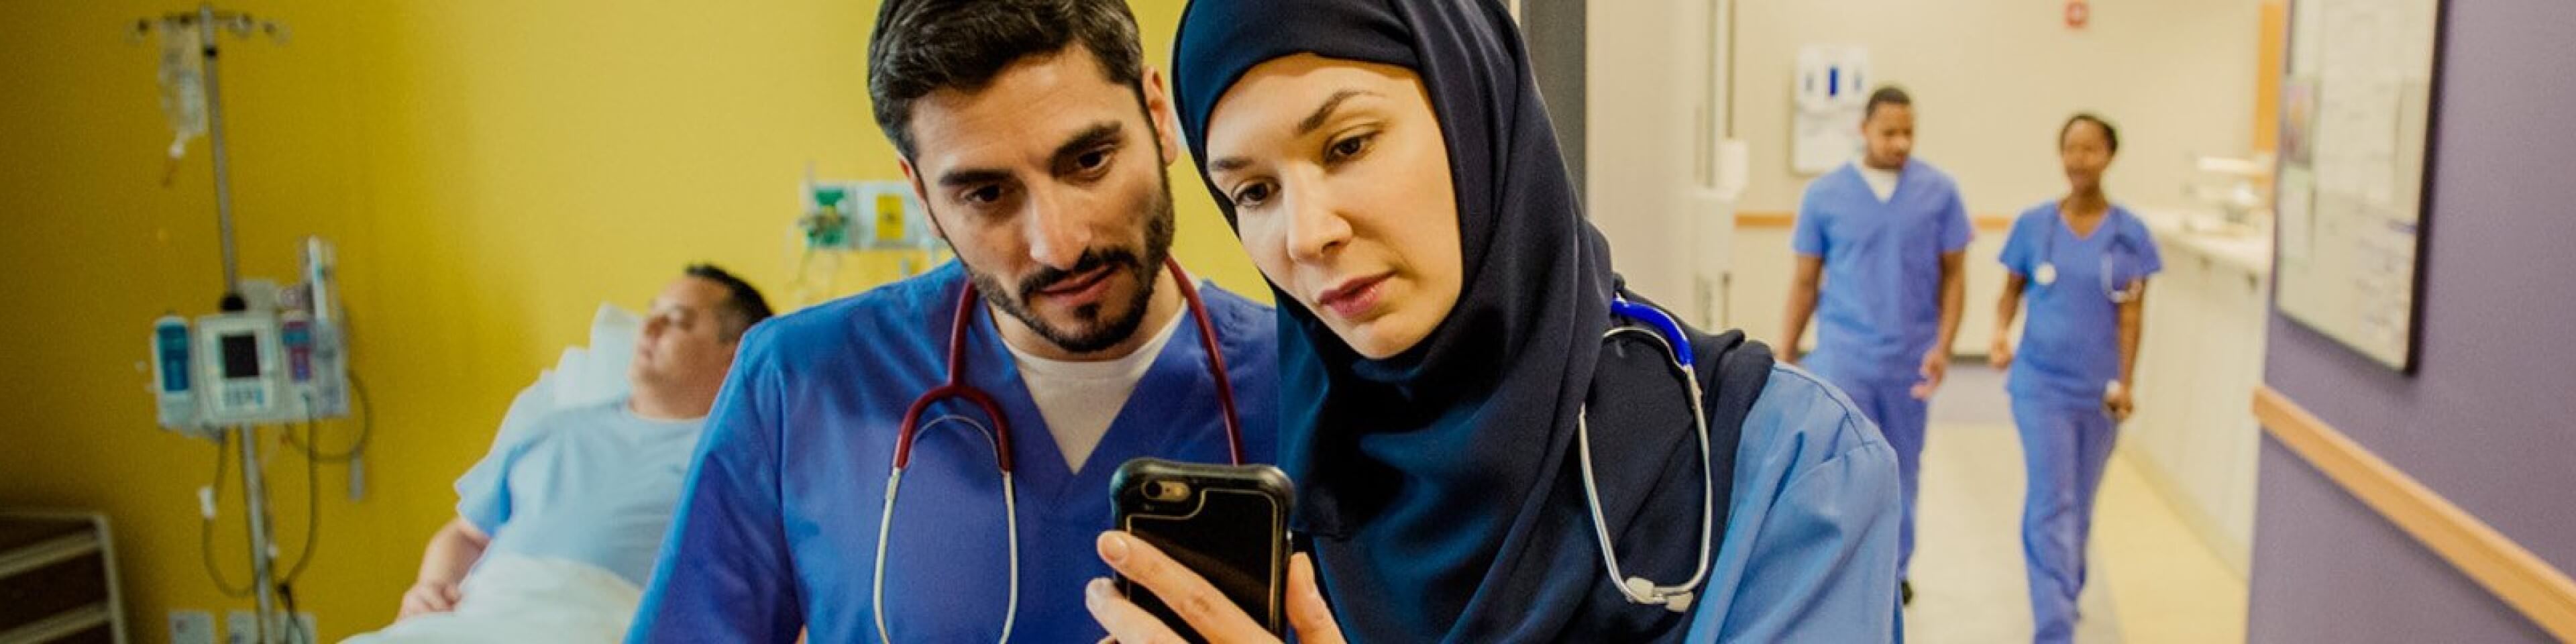 Doctors reviewing patient data on a secure mobile device